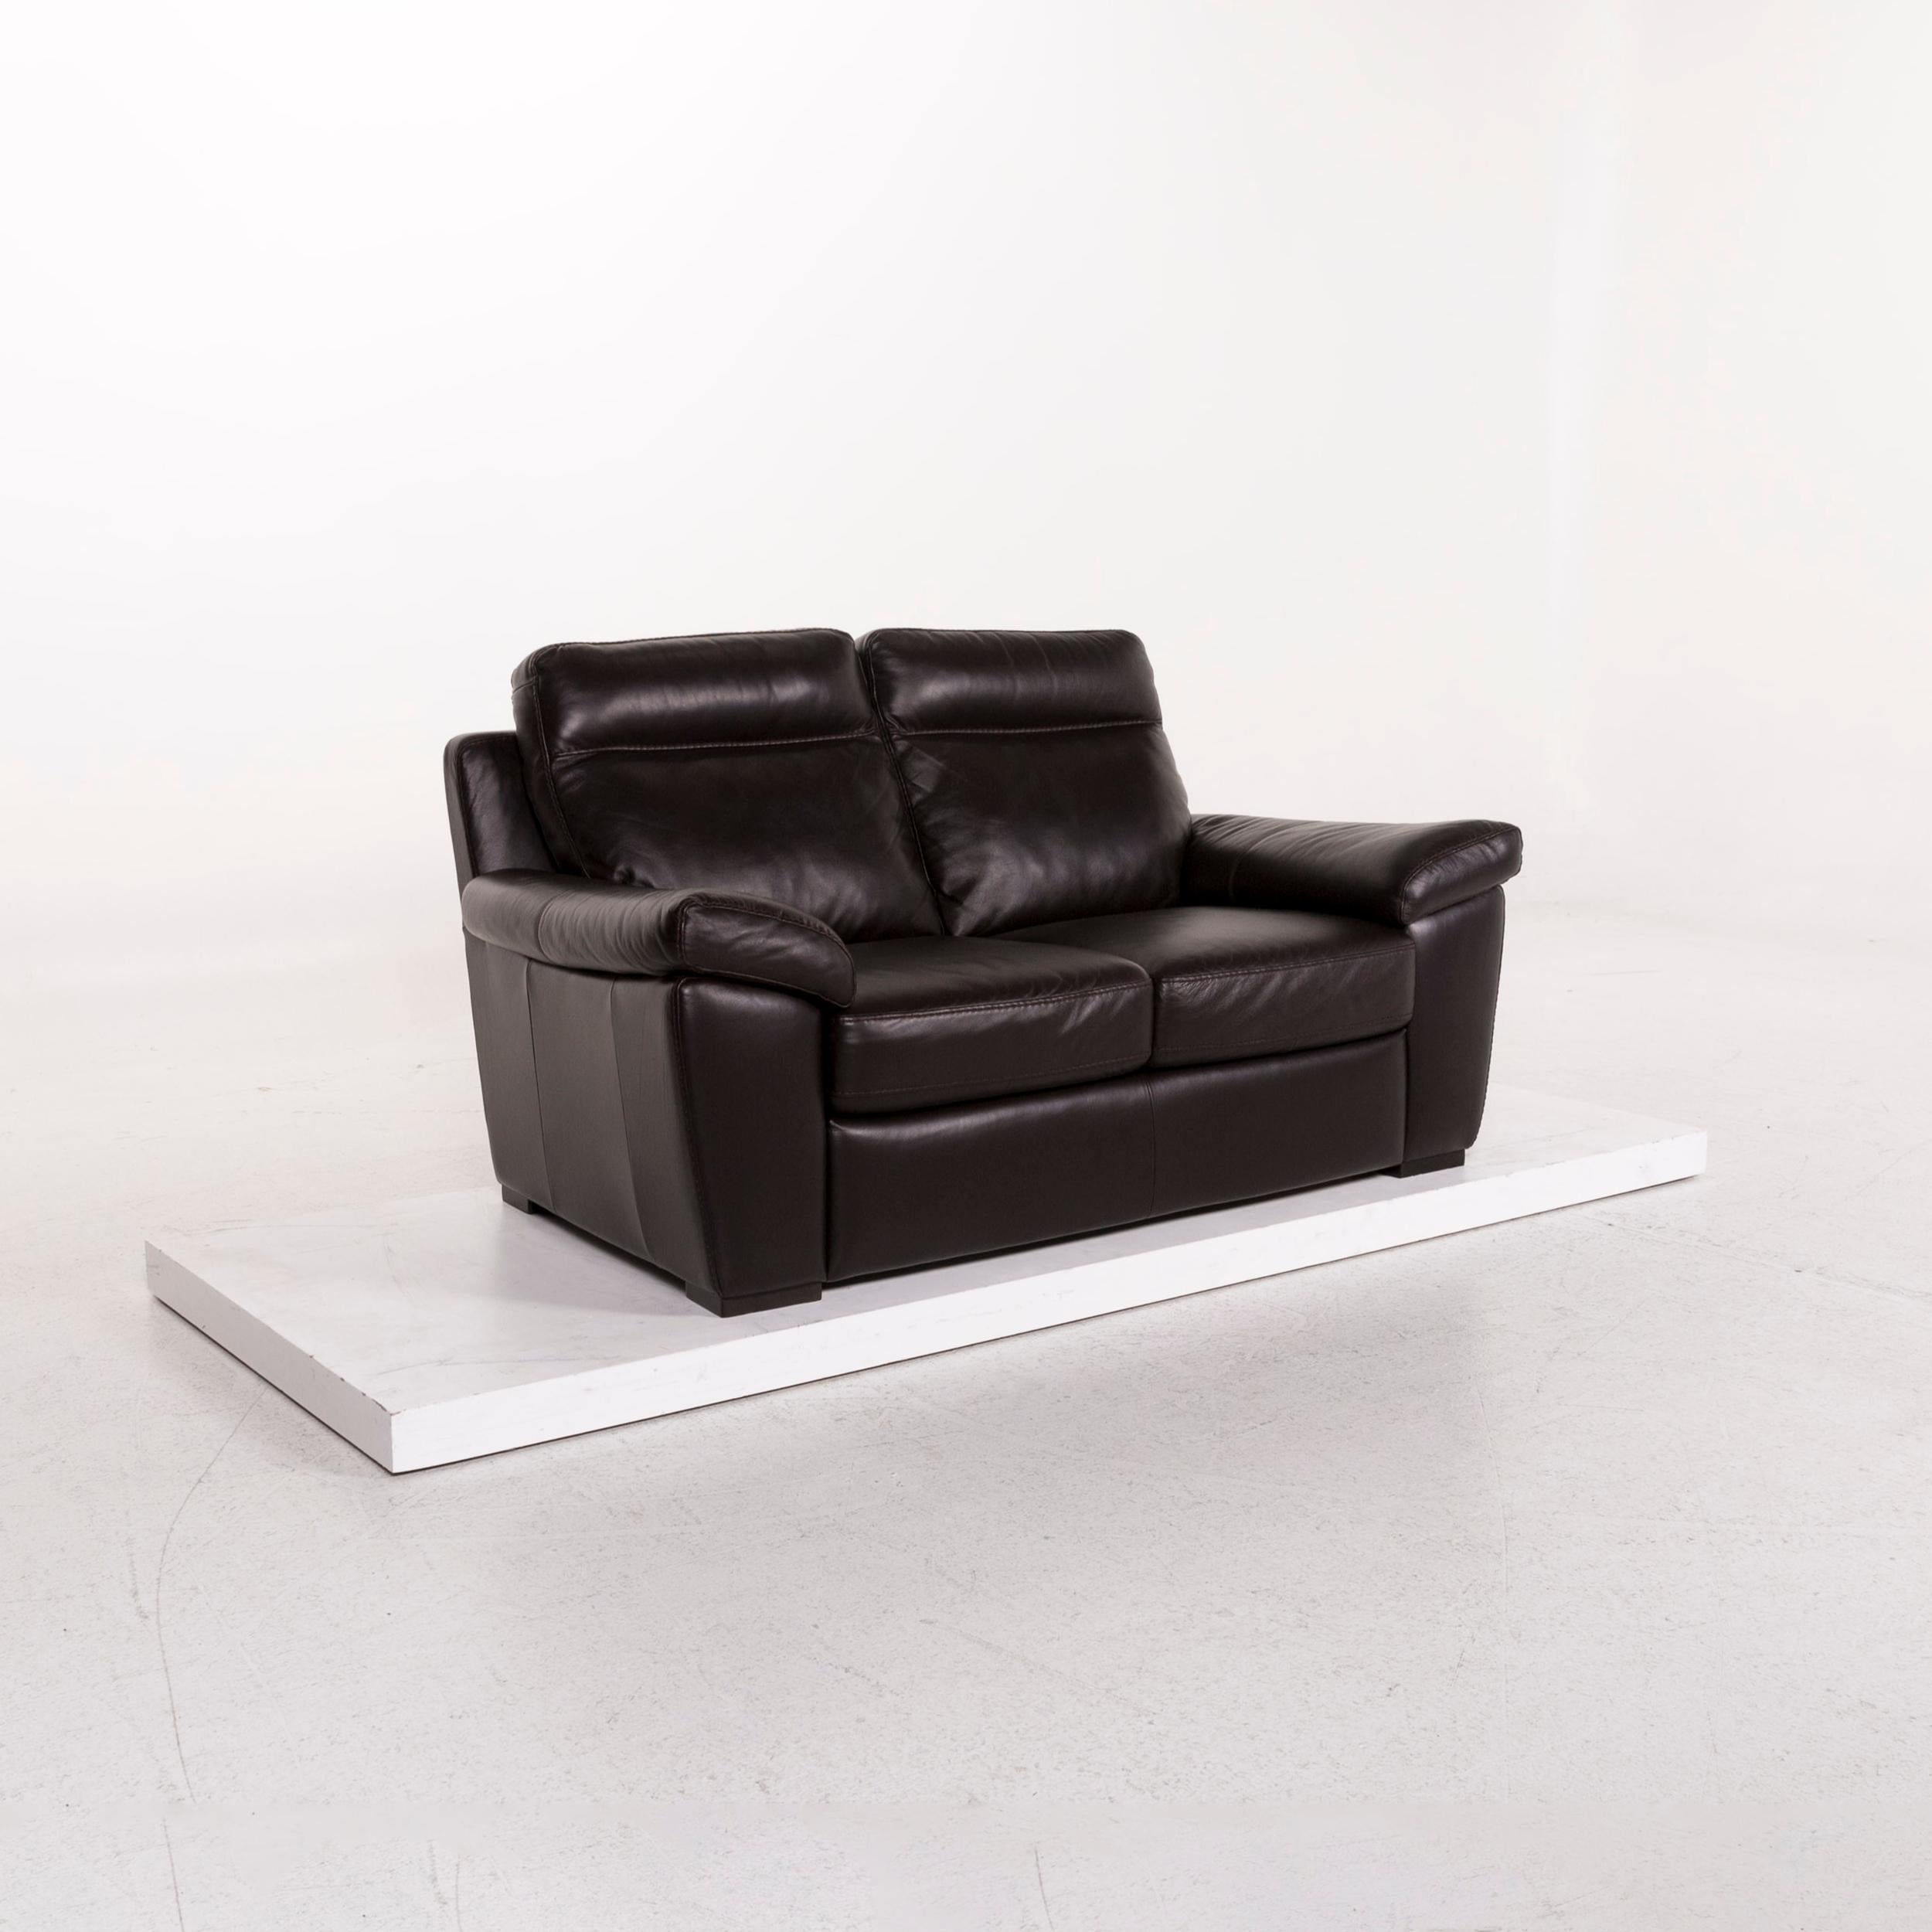 We bring to you a Natuzzi leather sofa brown dark brown two-seat couch.

 

 Product measurements in centimeters:
 

Depth 97
Width 162
Height 90
Seat-height 42
Rest-height 56
Seat-depth 54
Seat-width 102
Back-height 50.